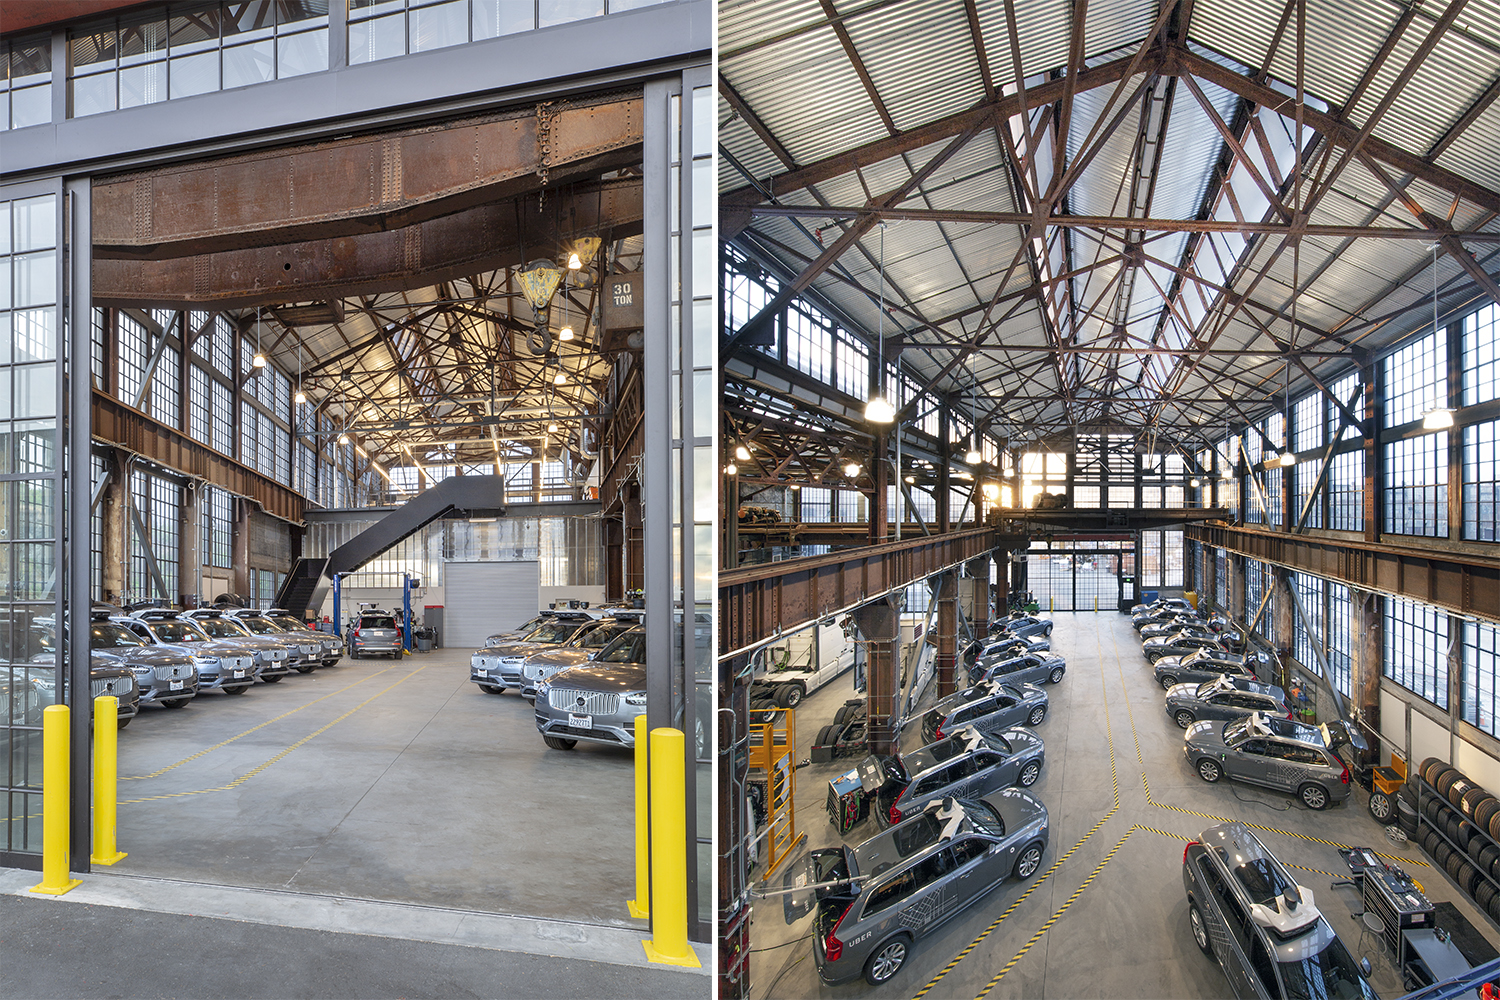 04_Projects_Adaptive Reuse of Historic Pier 70.jpg